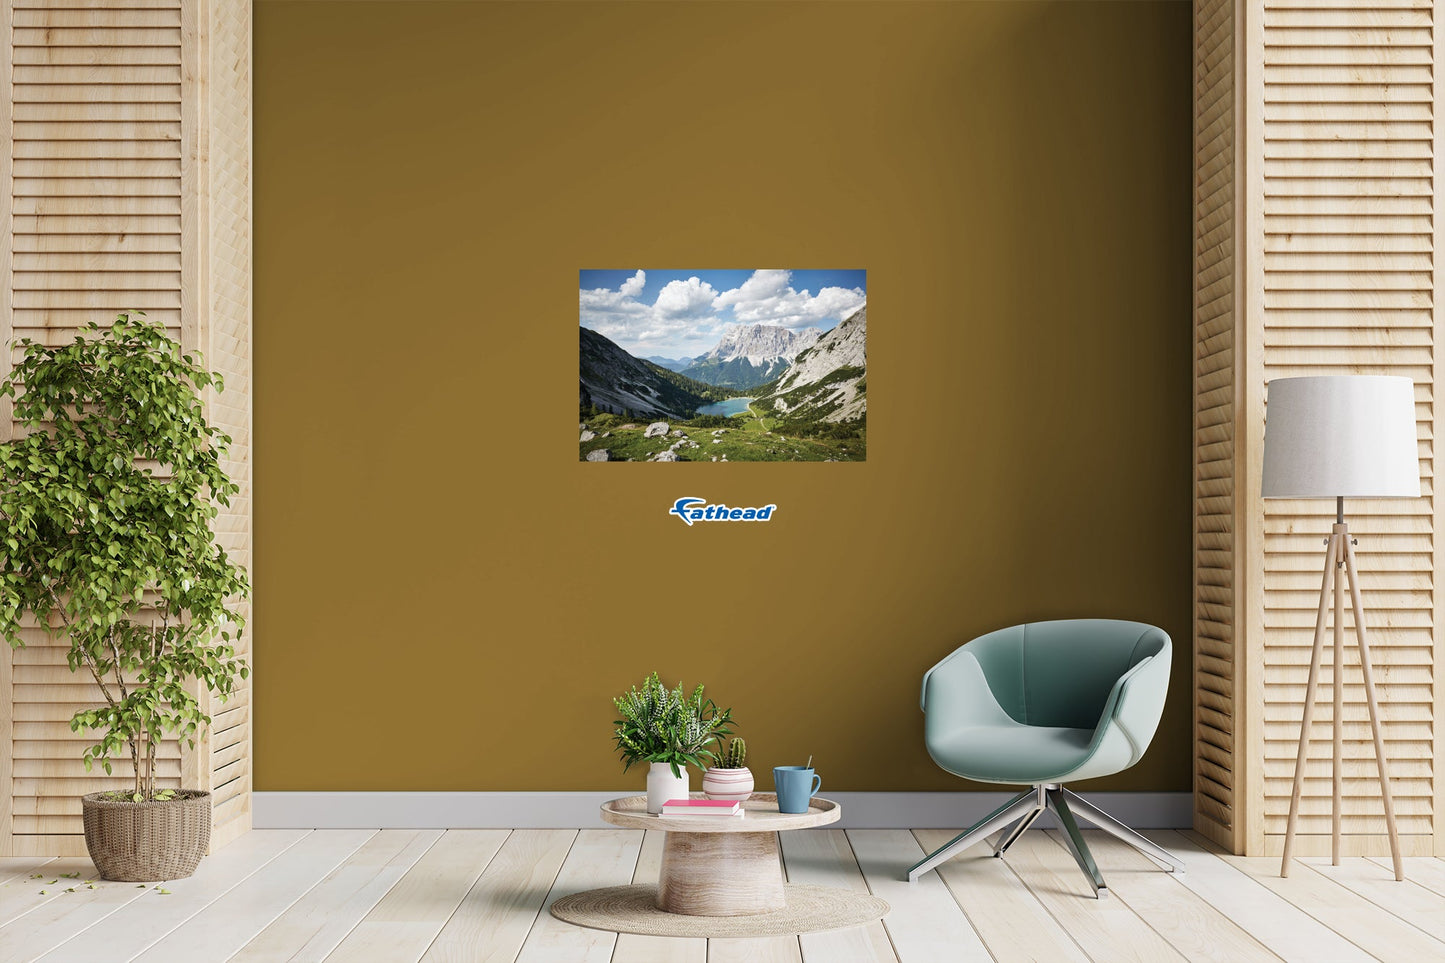 Generic Scenery: Above Poster - Removable Adhesive Decal